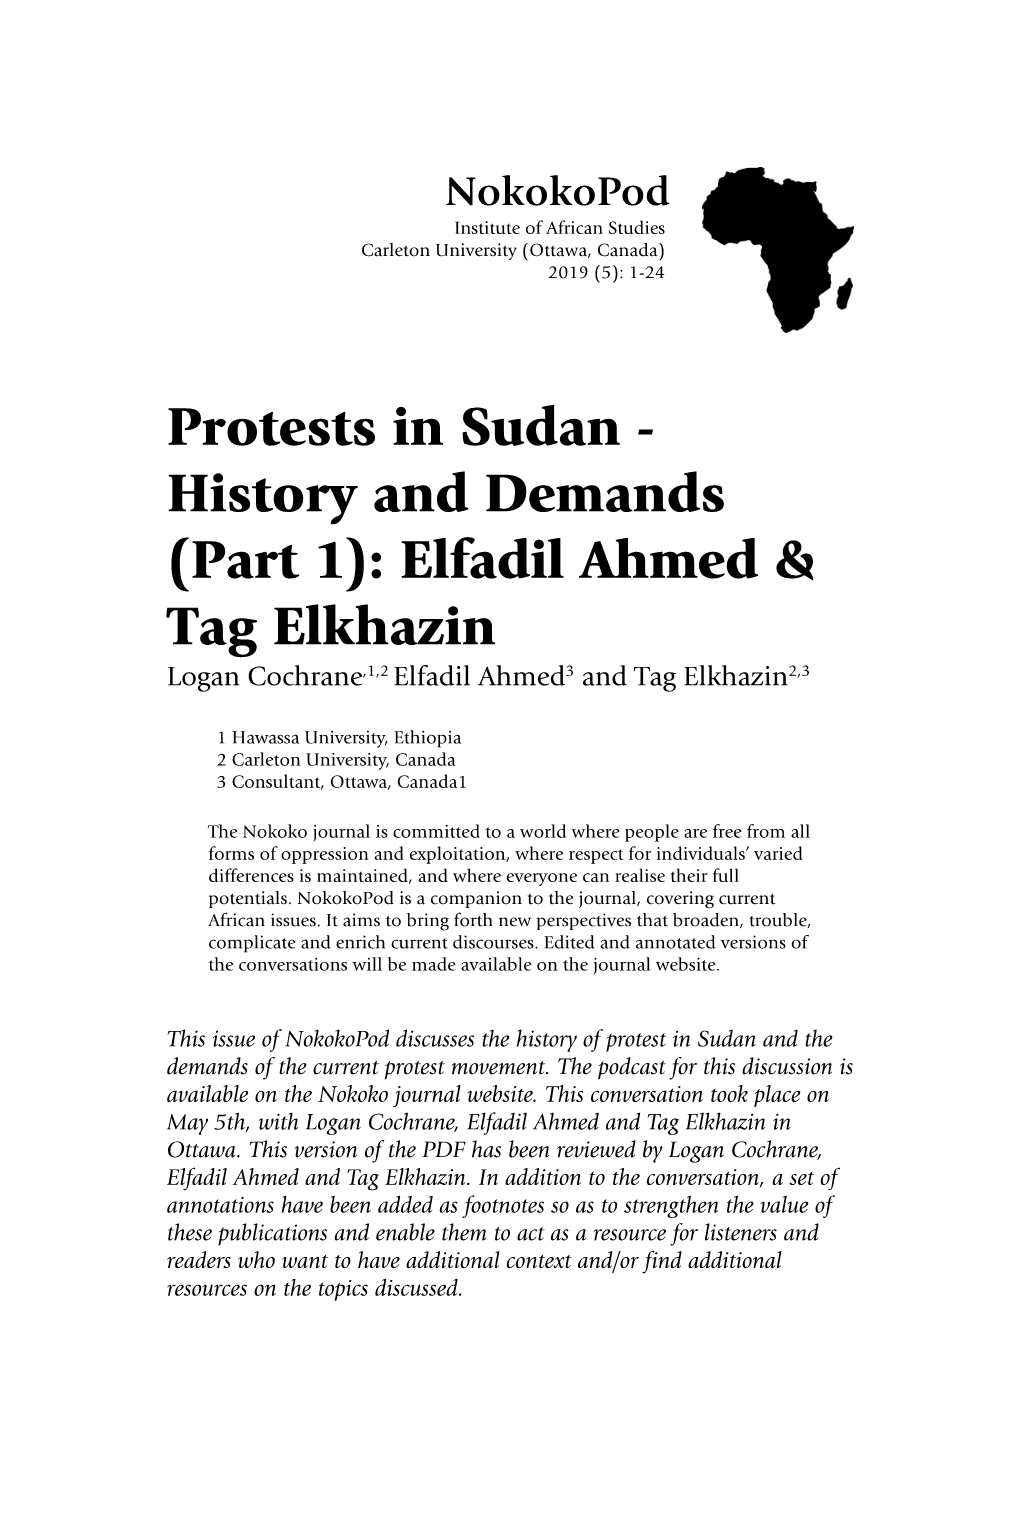 Protests in Sudan - History and Demands (Part 1): Elfadil Ahmed & Tag Elkhazin Logan Cochrane,1,2 Elfadil Ahmed3 and Tag Elkhazin2,3